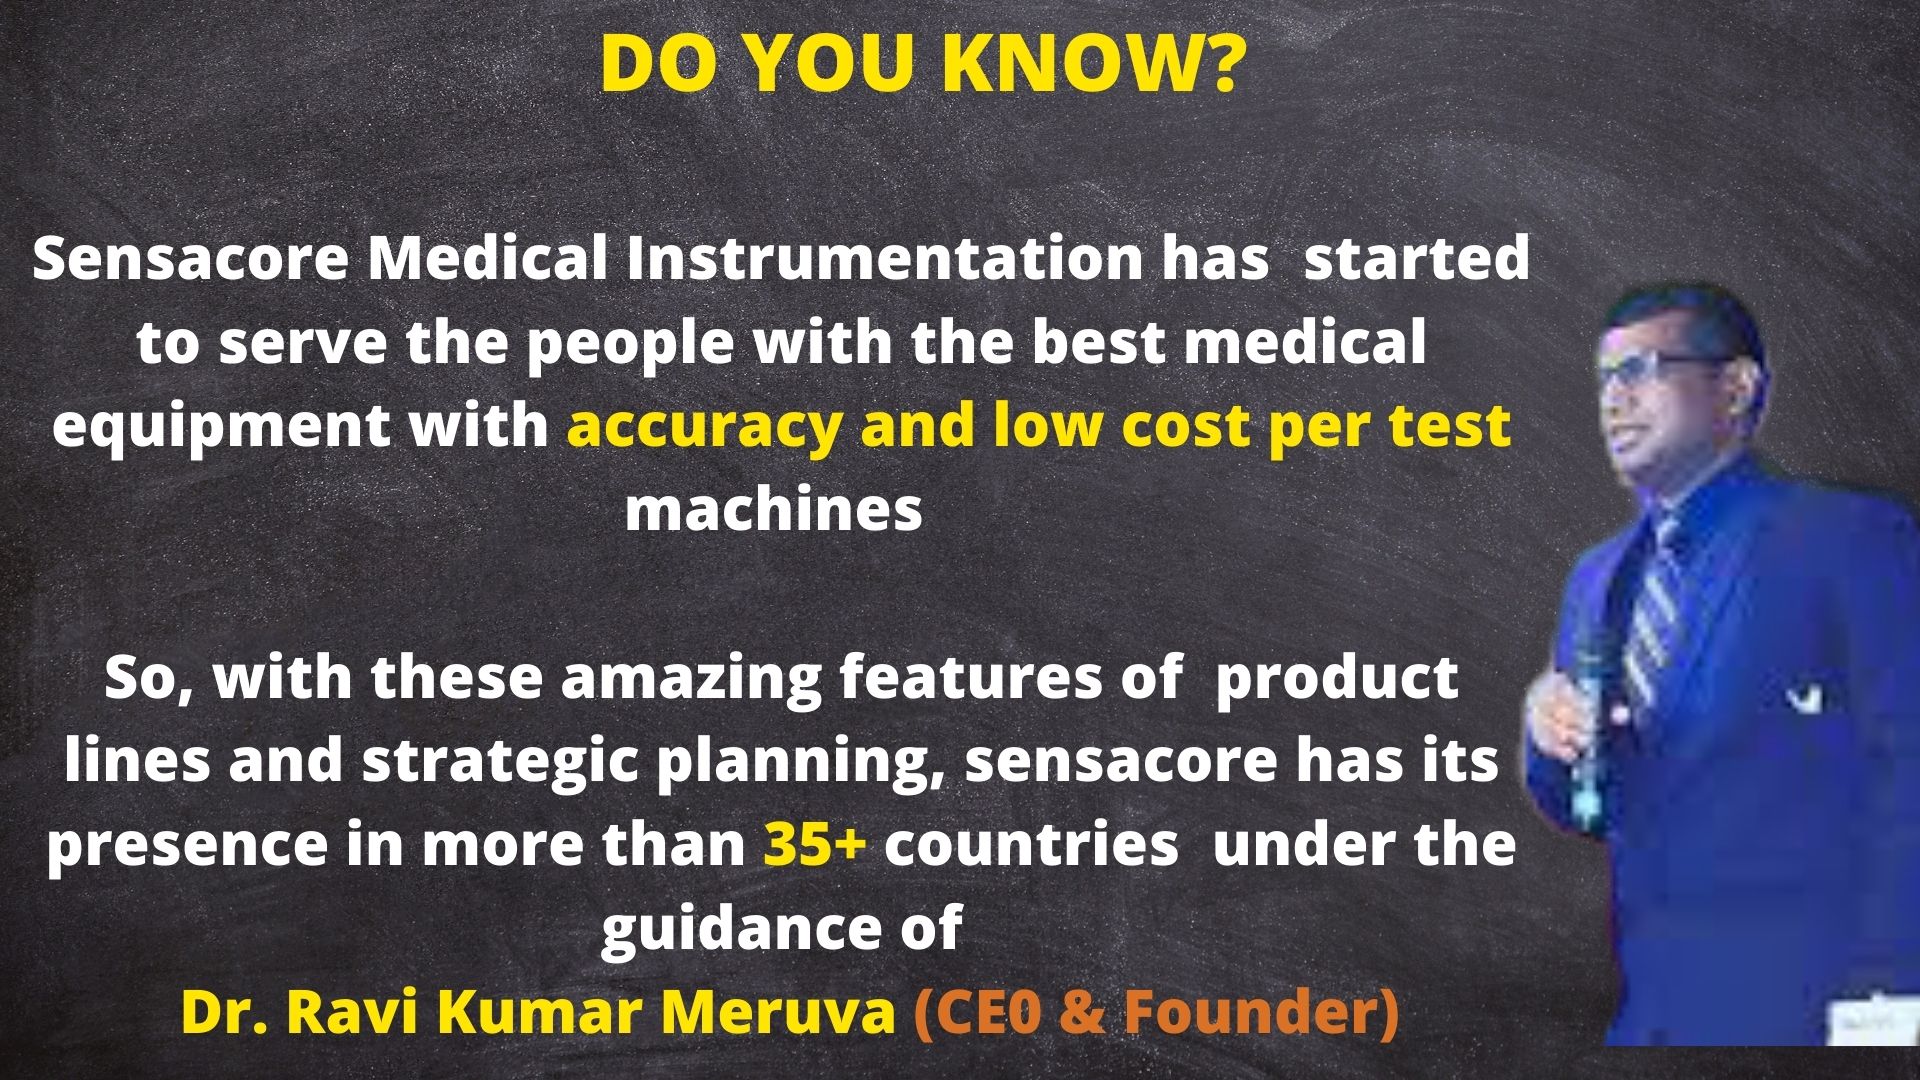 Sensacore Medical Instrumentation is the leading in-vitro and point of care diagnostic device in india under the guidance of Dr.Ravi kumar meruva